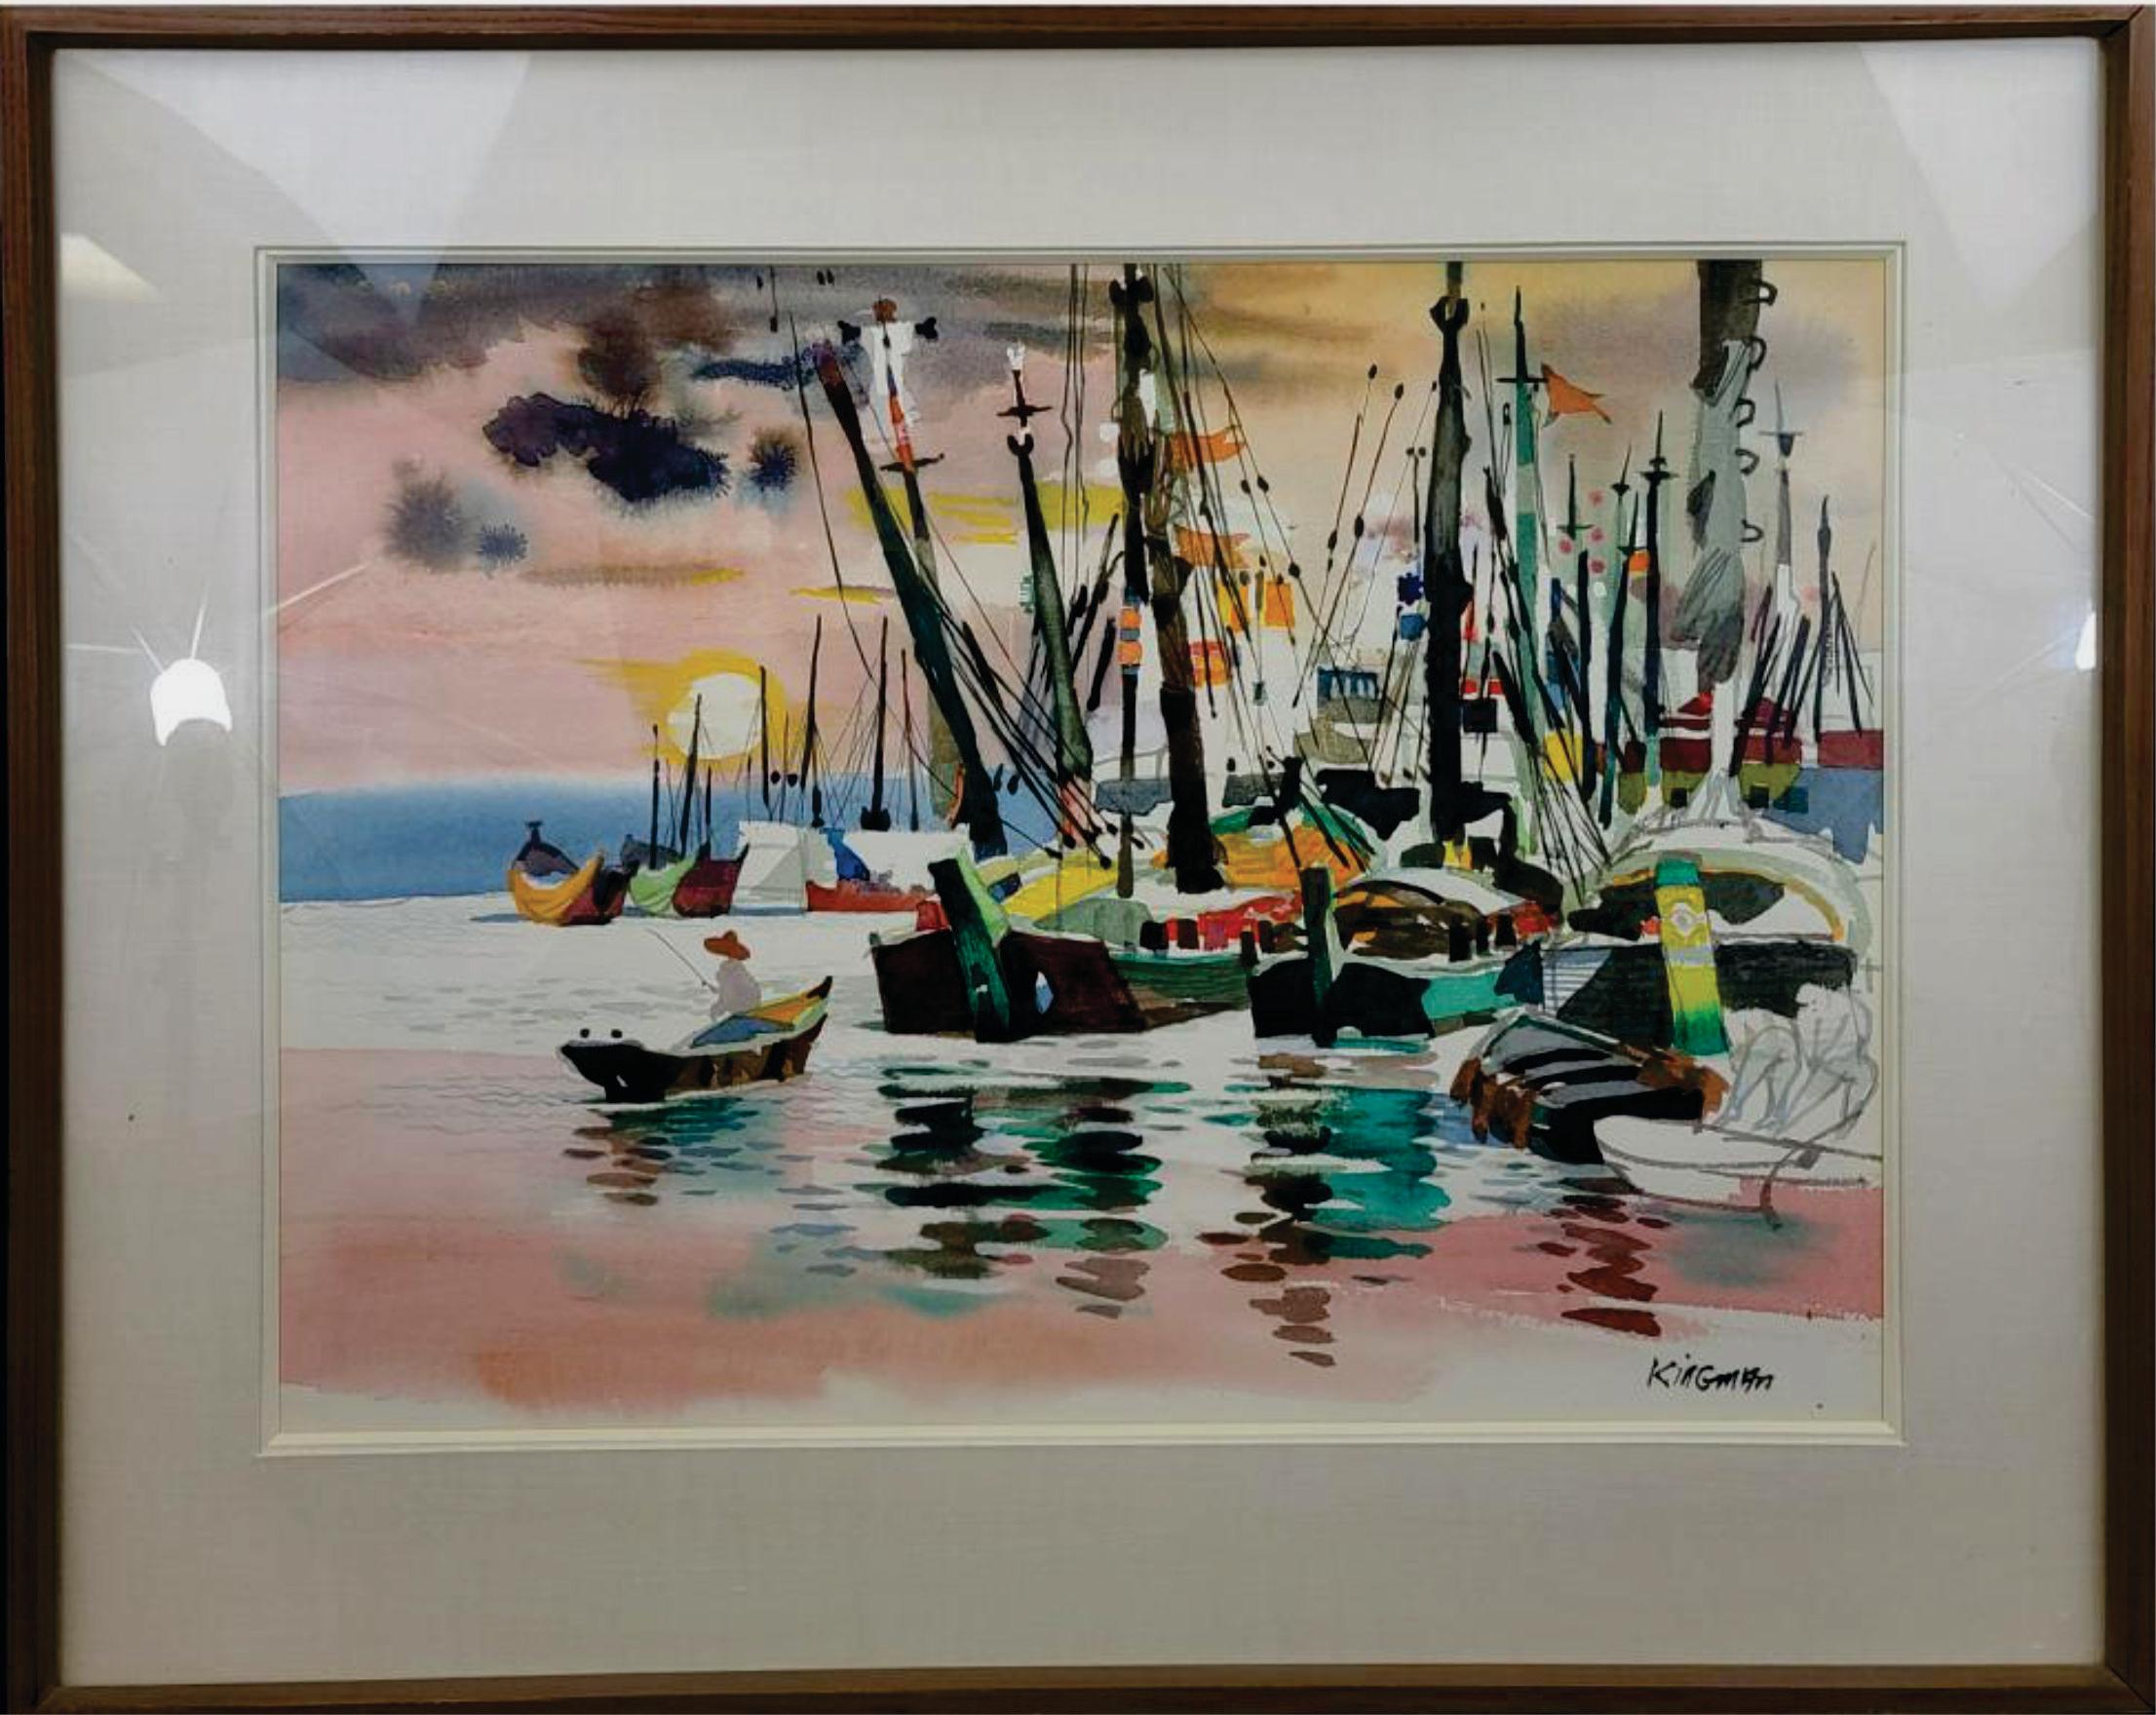 Dong Kingman Large Original Watercolor Painting "Sunset in Harbor" Signed For Sale